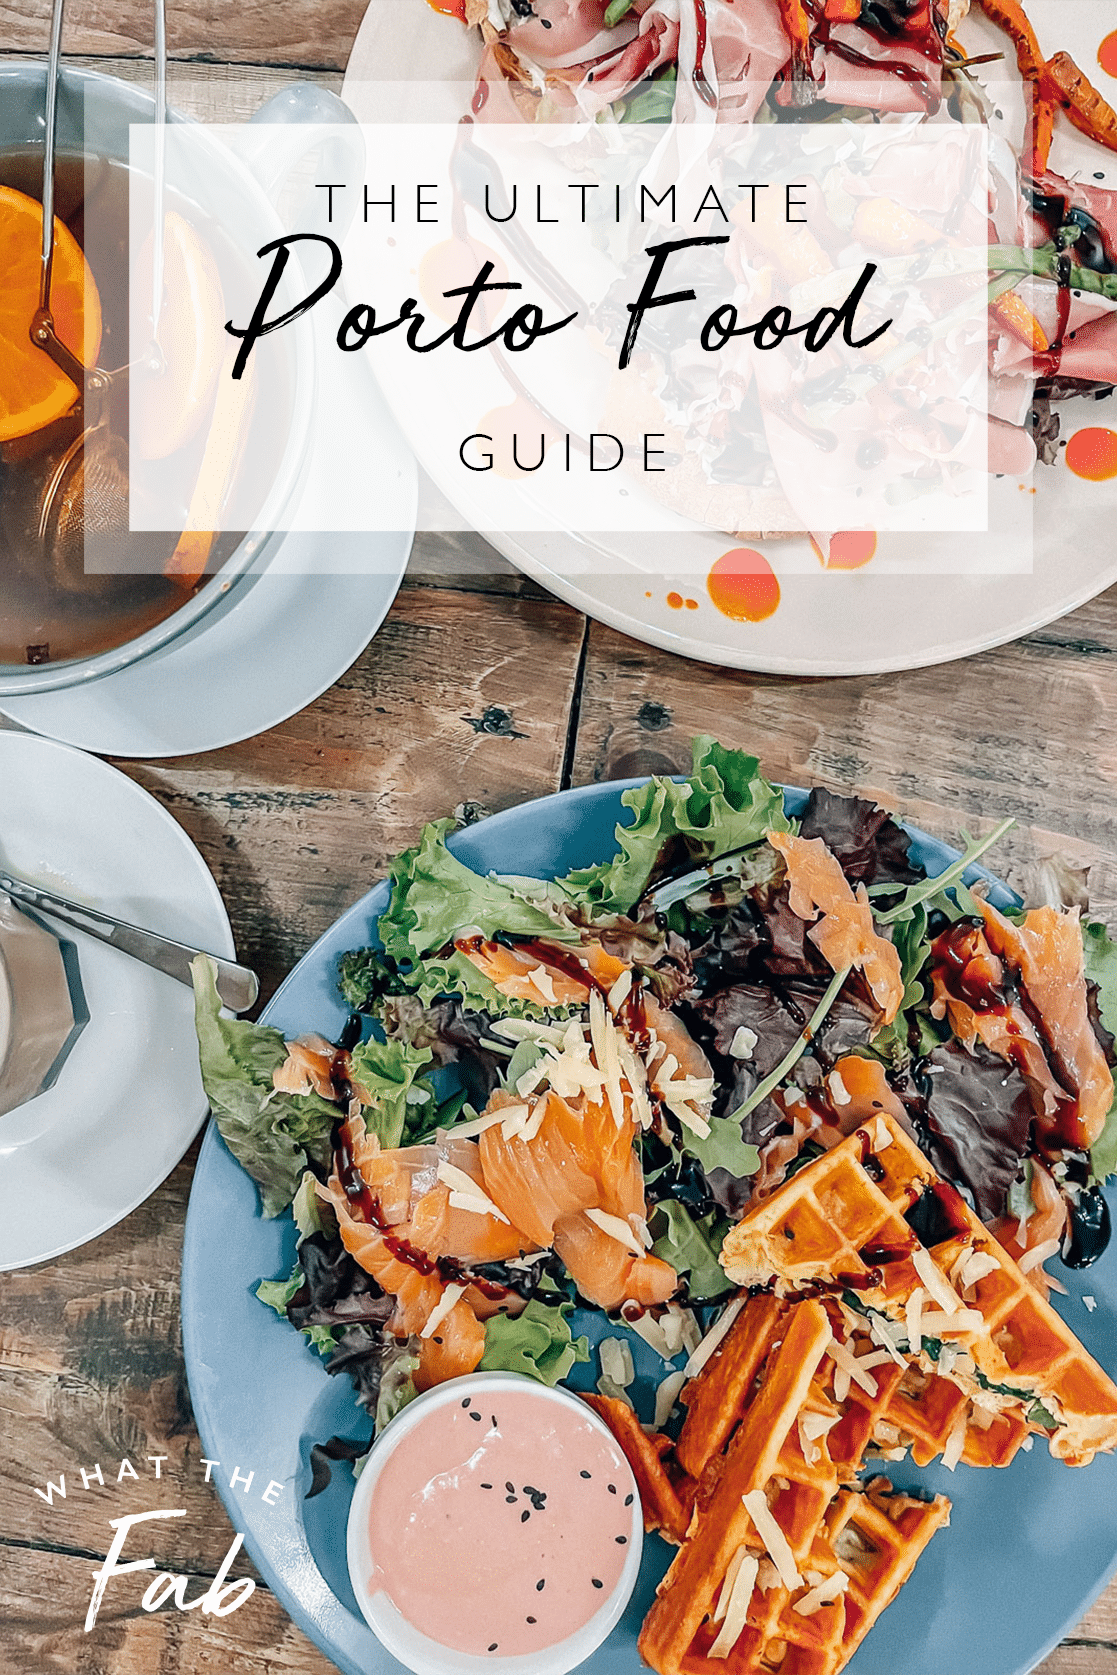 Porto Food, by Travel Blogger What The Fab